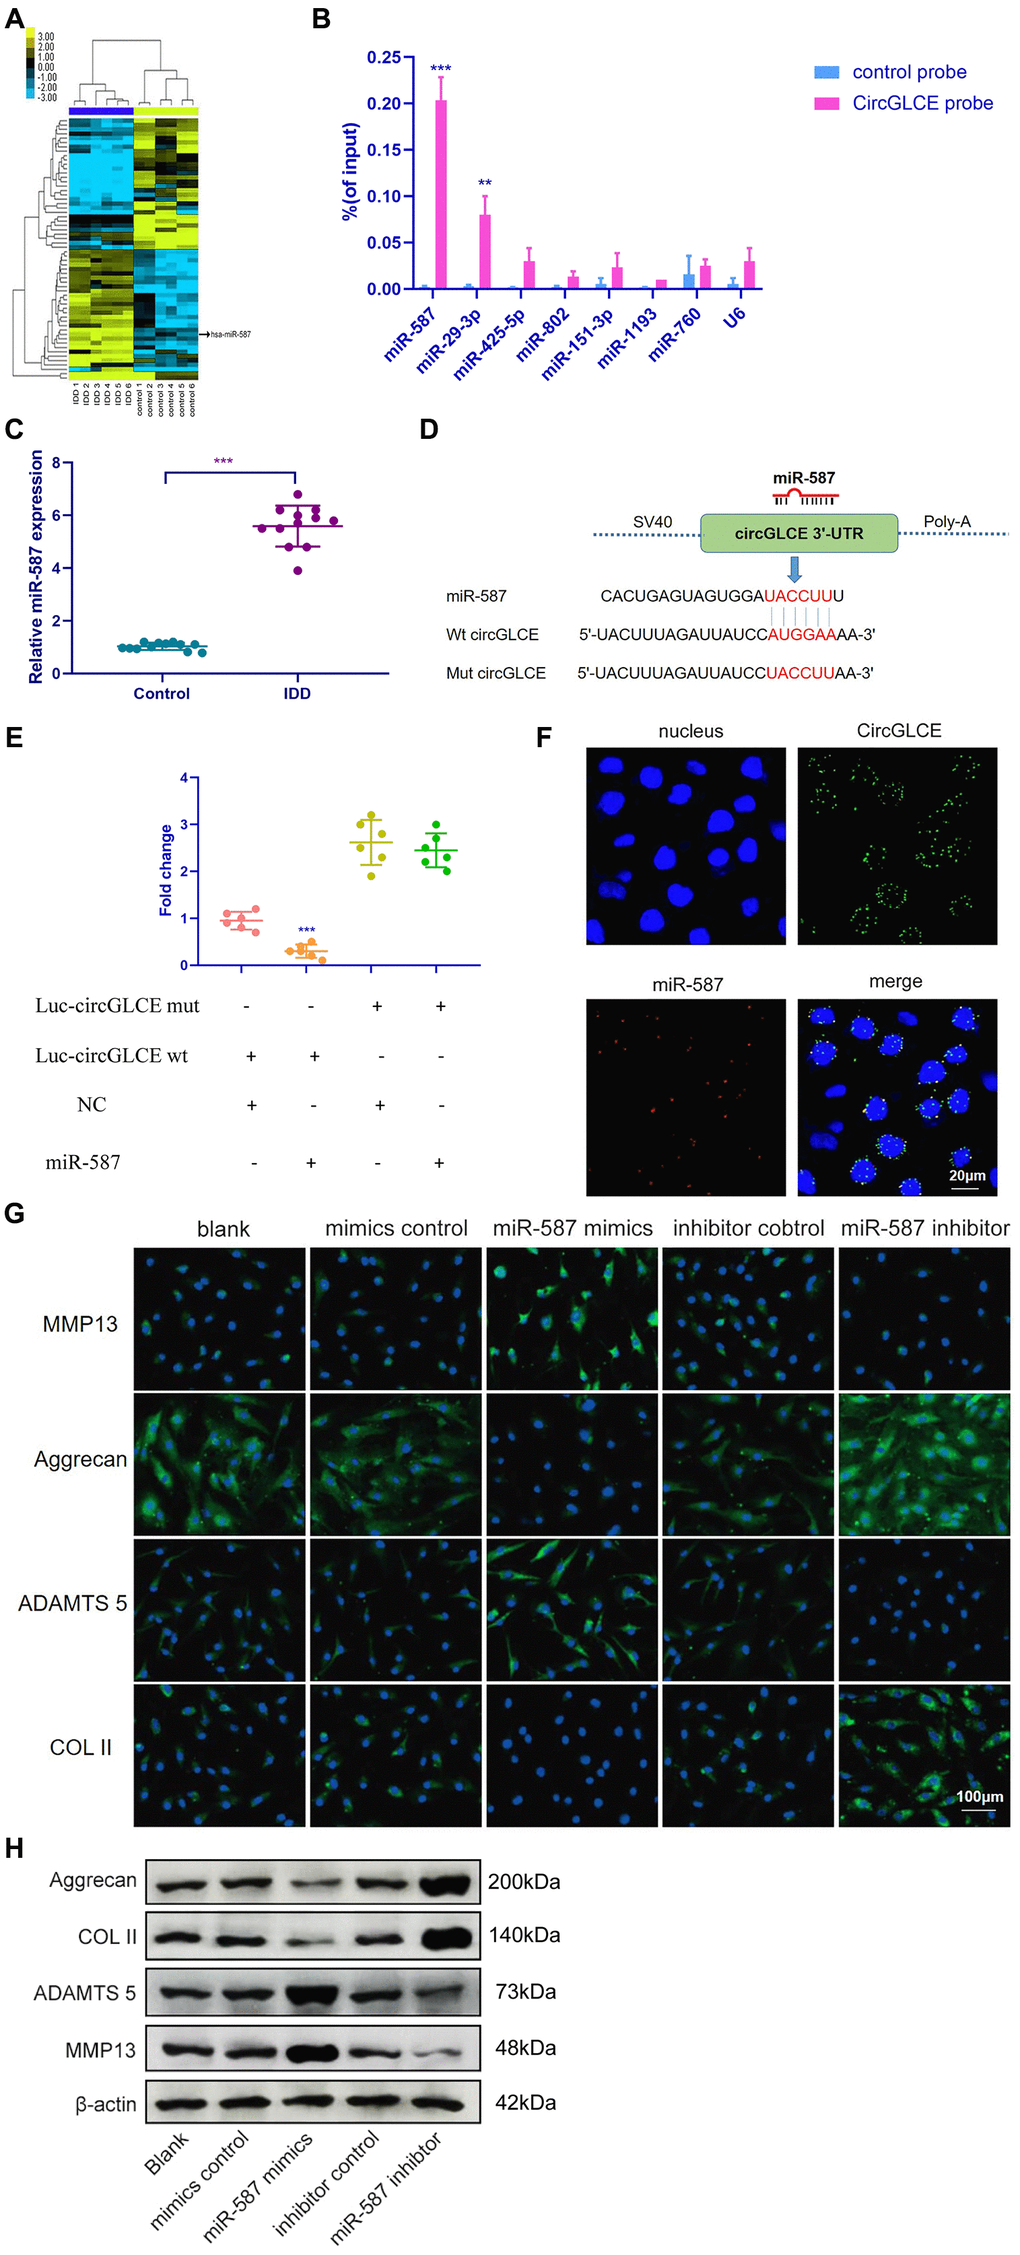 CircGLCE serves as a miR-587 sponge in NP cells. (A) Differentially expressed miRNAs in degenerative NP samples were identified with high-throughput sequencing. (B) Following RNA pull-down experiments performed with a CircGLCE probe, RT-qPCR indicated significantly high miR-587 levels. The relative levels of CircGLCE were normalized to the input levels (***P C) RT-qPCR demonstrated that miR-587 was upregulated in IDD (n=12, **P D) The binding sites in CircGLCE for miR-587 were analysed by a bioinformatic approach. (E) NP cells were co-transfected with miR-587 mimics/negative controls and luciferase reporter constructs for wild-type or mutant CircGLCE. Dual luciferase assays demonstrated binding between miR-587 and CircGLCE (n=6, *** PF) FISH showed the colocalization of CircGLCE and miR-587 in NP cells. The miR-587 probe was labelled with Alexa Fluor 488, the CircGLCE probe was tagged with Cy3, and the nuclei were stained with DAPI. (G) The ECM enzymes were effectively regulated by overexpressing or knocking down miR-587. *** PH) Western blot analysis (n=3) confirmed the results in (G). Data are the mean ± SEM.